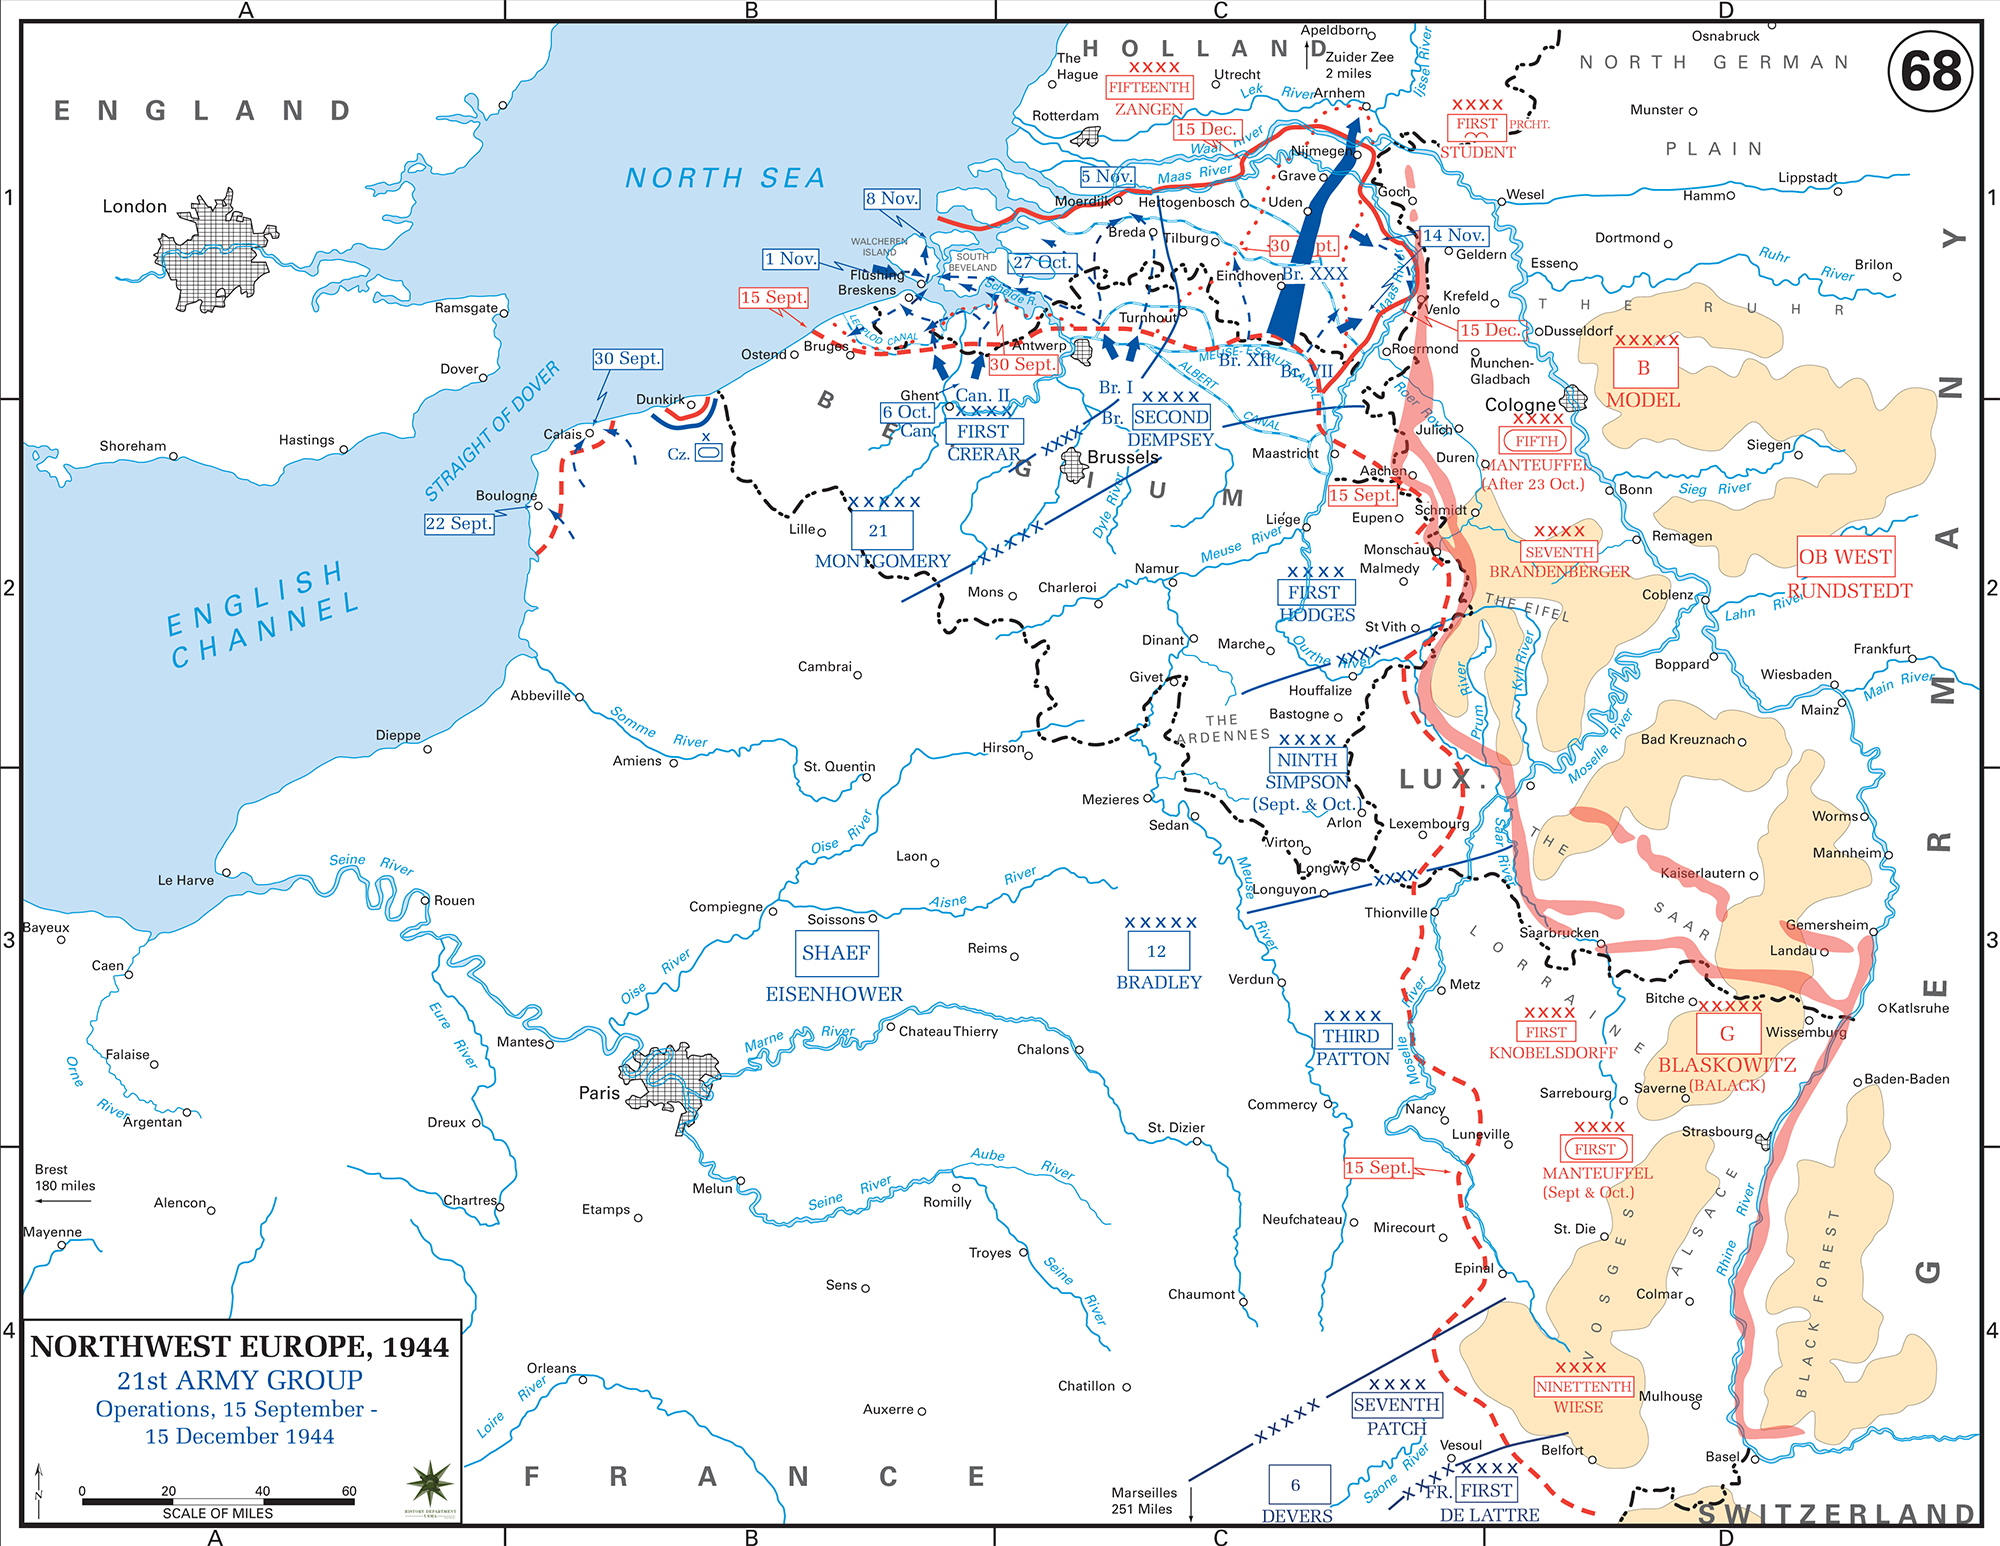 Map of World War II: Western Europe, 21st Army Group, Operations September 15 - December 15, 1944